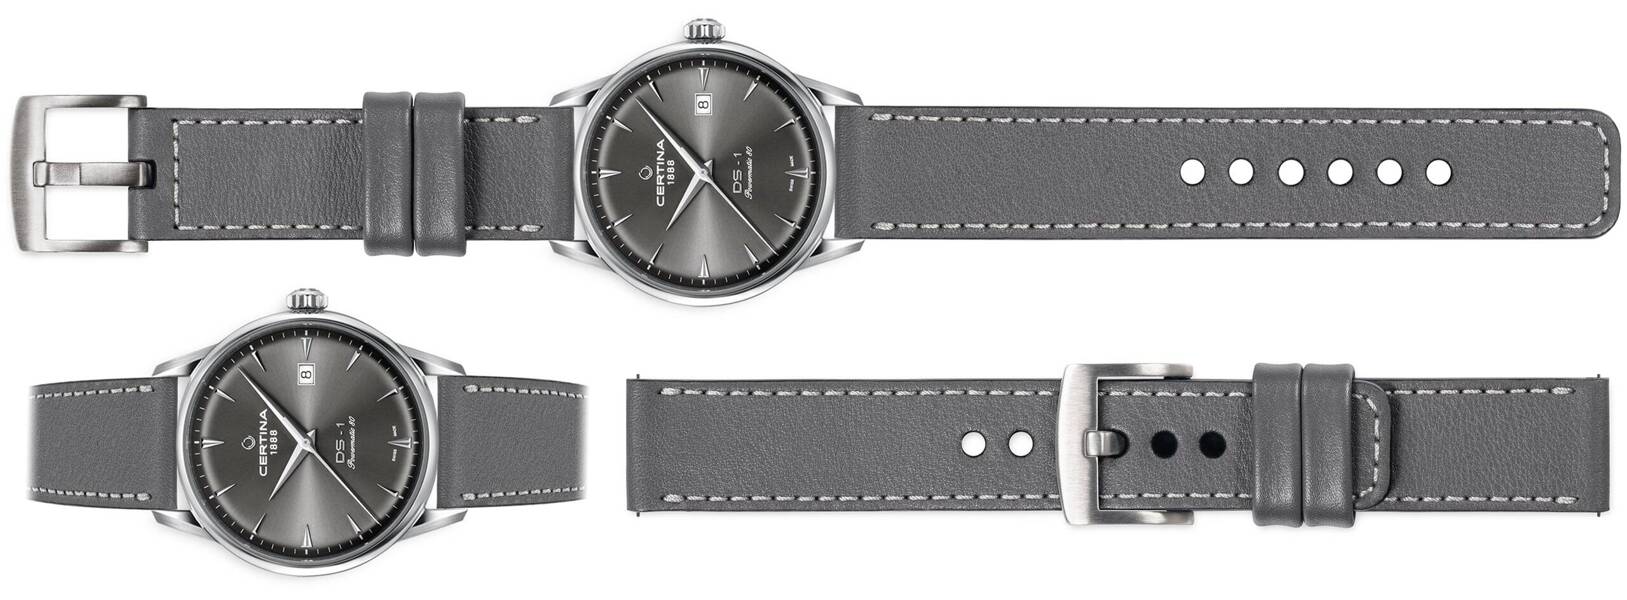 moVear Prestige C1 20mm Gray Leather strap for Certina DS-1 C029.807.11.081.02 | Gray stitching [sizes XS-XXL]